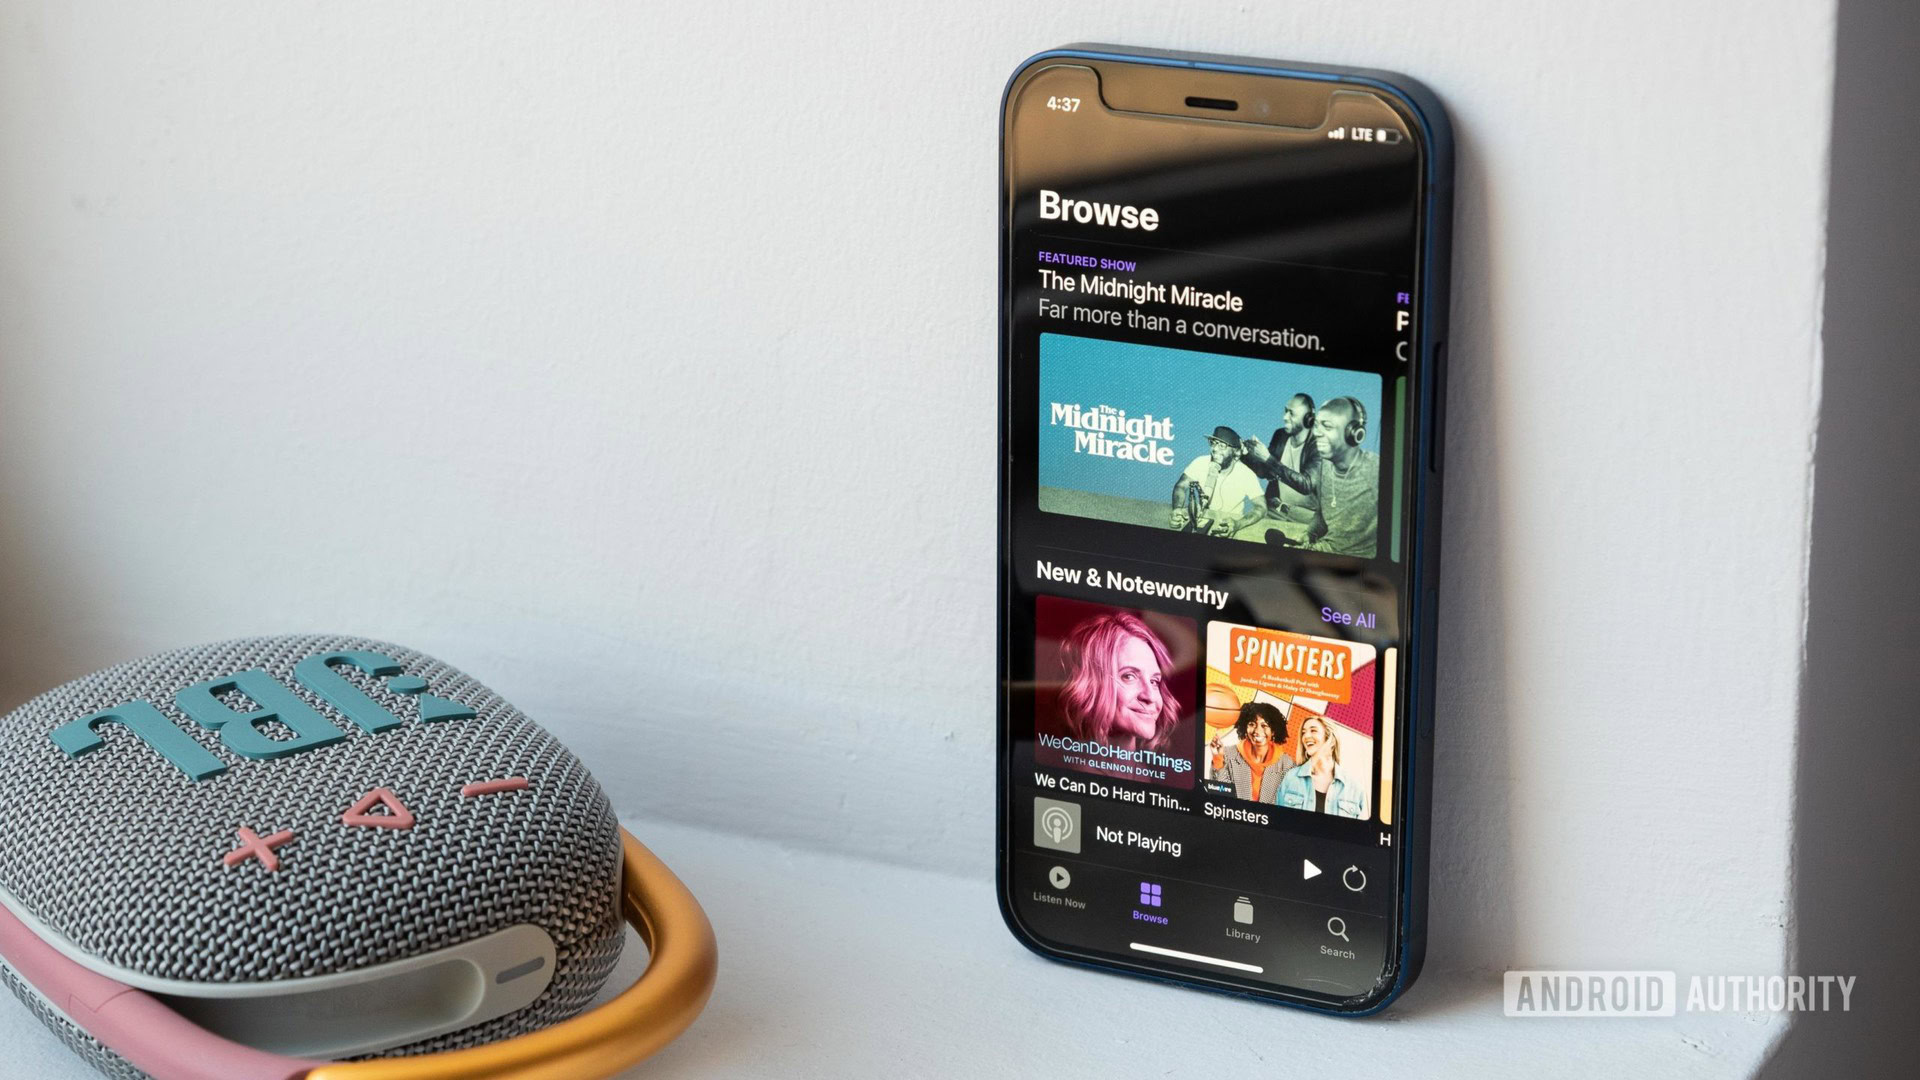 An iPhone 12 Mini rests against a wall, next to the JBL Clip 4 Bluetooth speaker, and the phone displays the Apple Podcast app homepage.